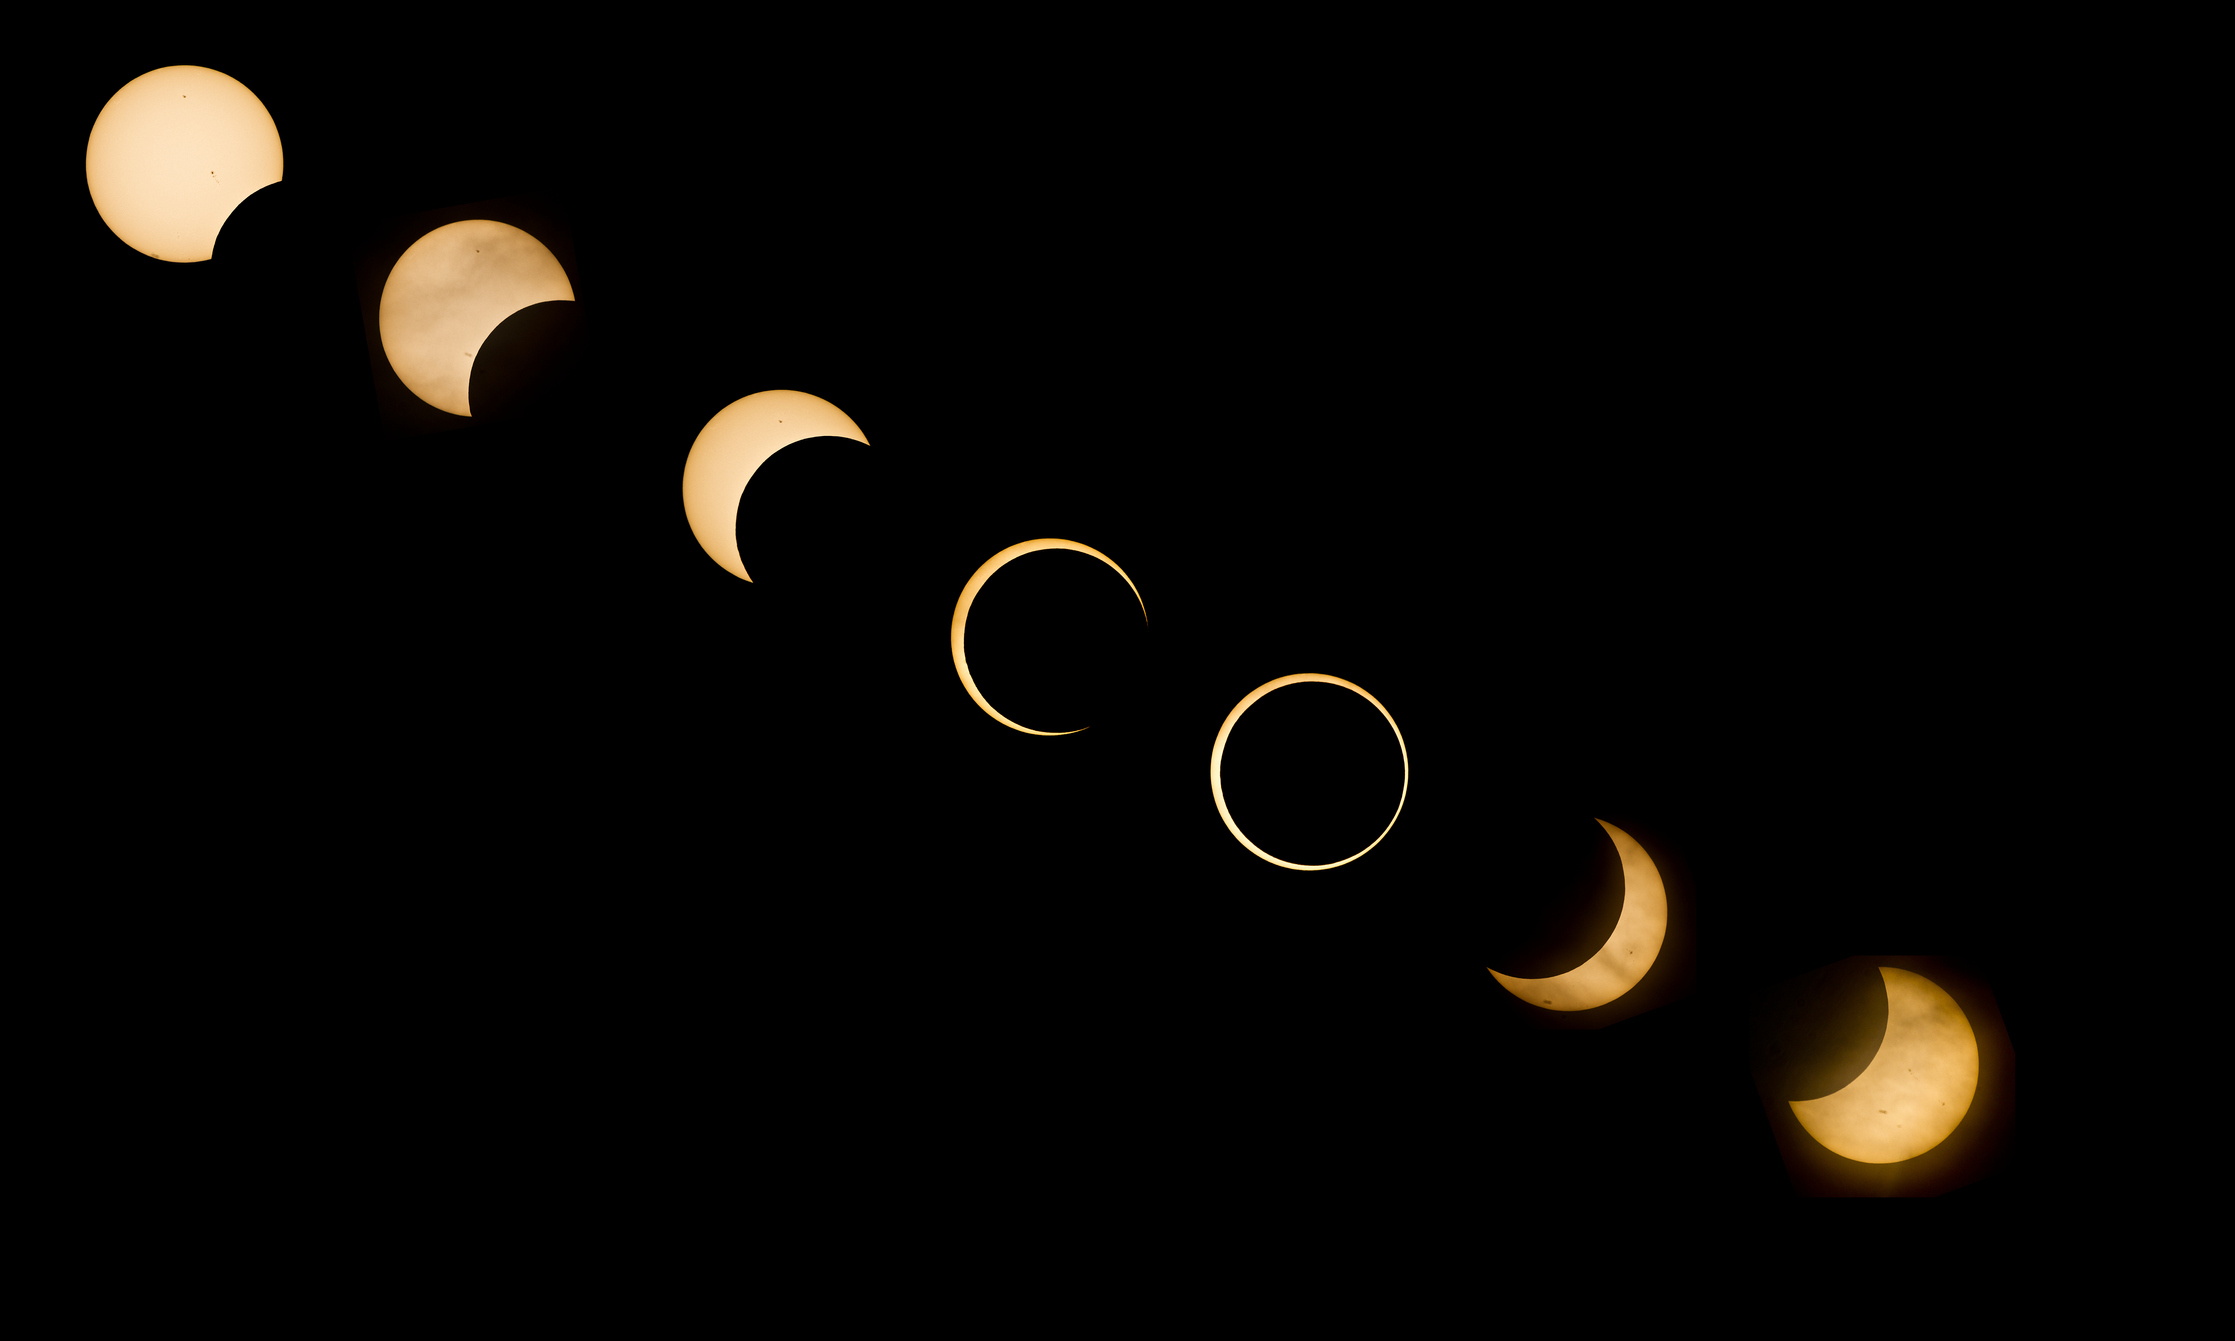 series of stages of an annular eclipse where the moon appears to take a bigger and bigger 